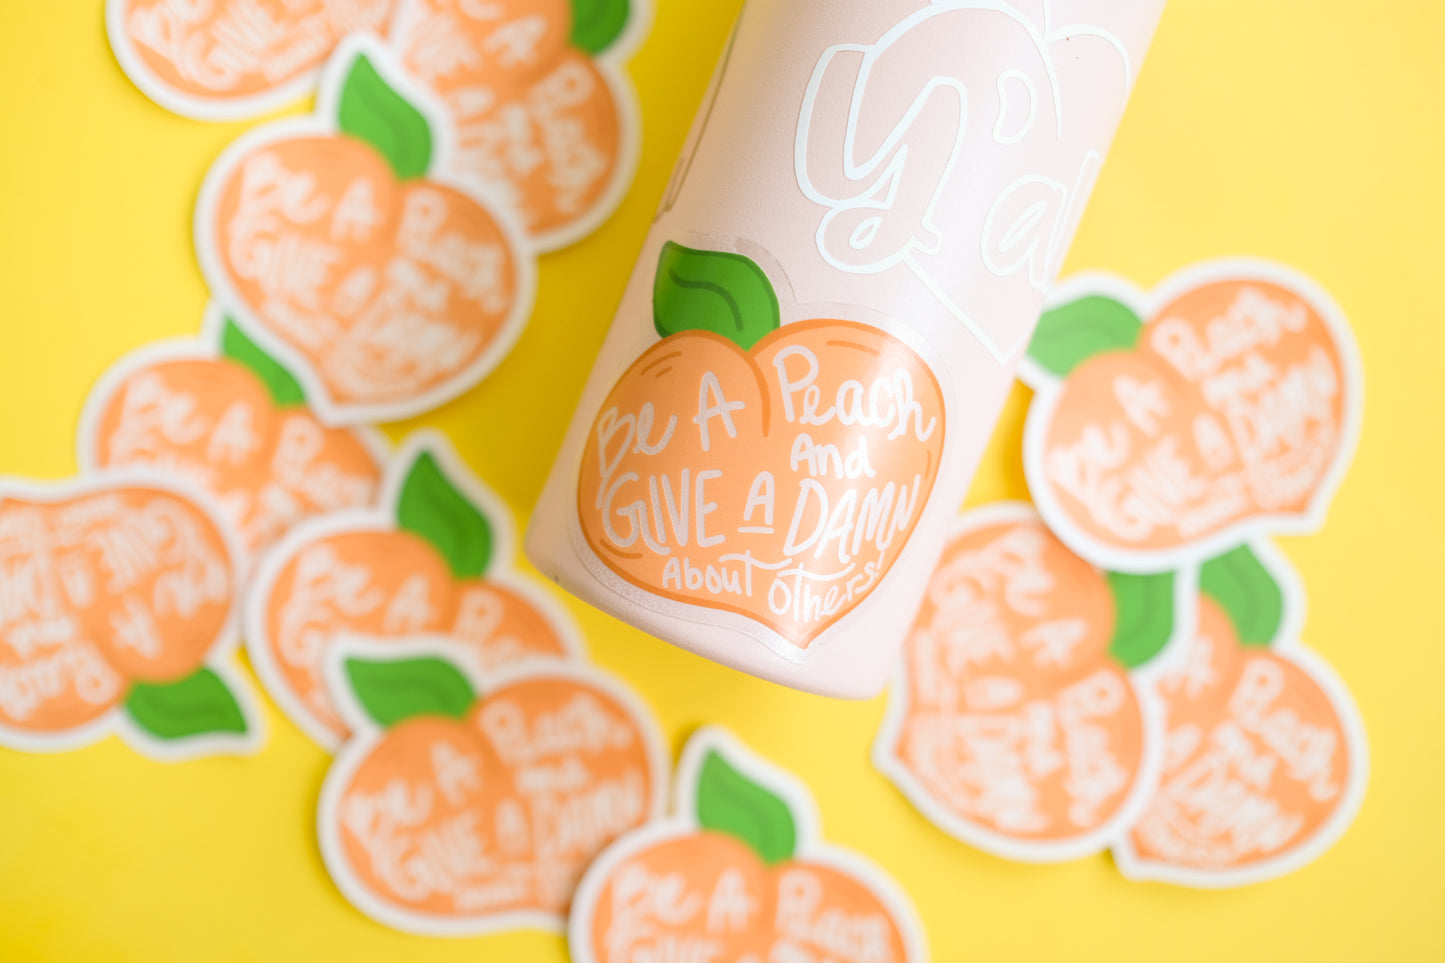 Be A Peach and Give A Damn About Others Transparent Sticker